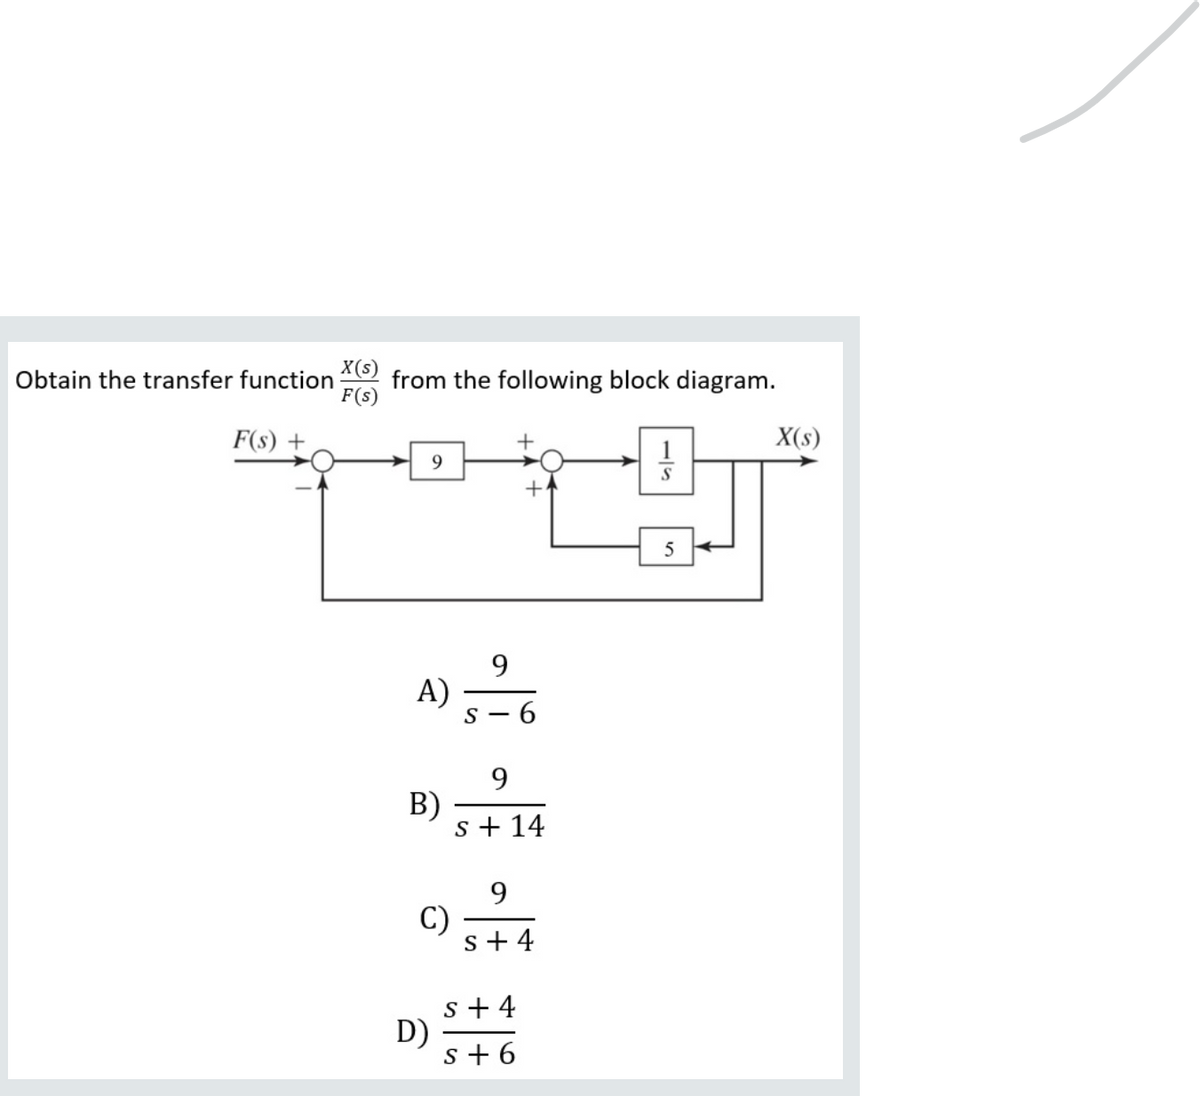 X(s)
from the following block diagram.
F(s)
Obtain the transfer function
F(s) +
X(s)
9.
5
9
A)
s - 6
9.
B)
s + 14
9.
C)
s+ 4
s + 4
D)
s + 6
